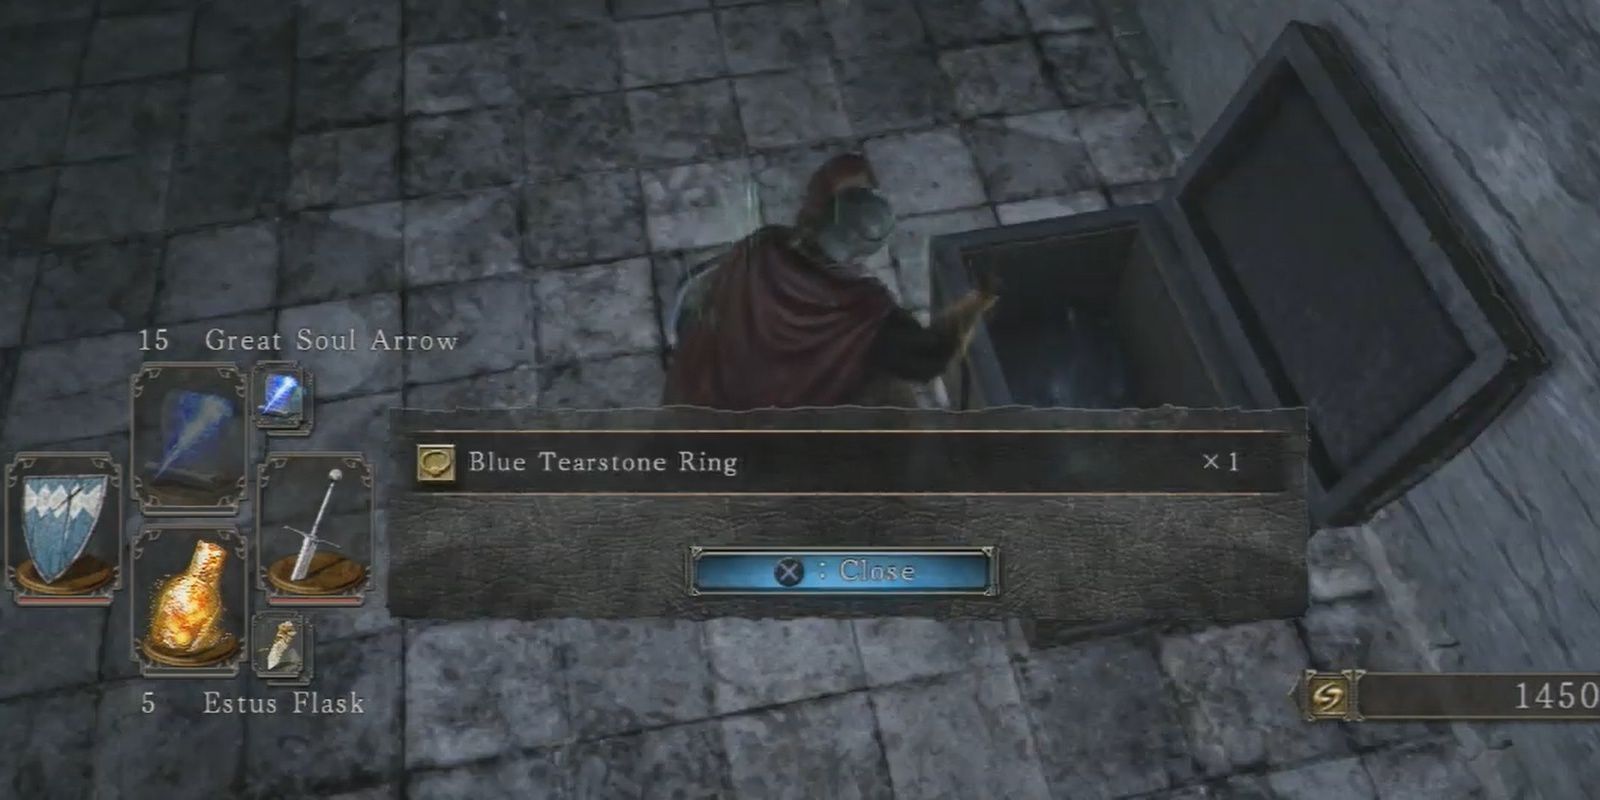 Player finds the Blue Tearstone Ring in a chest